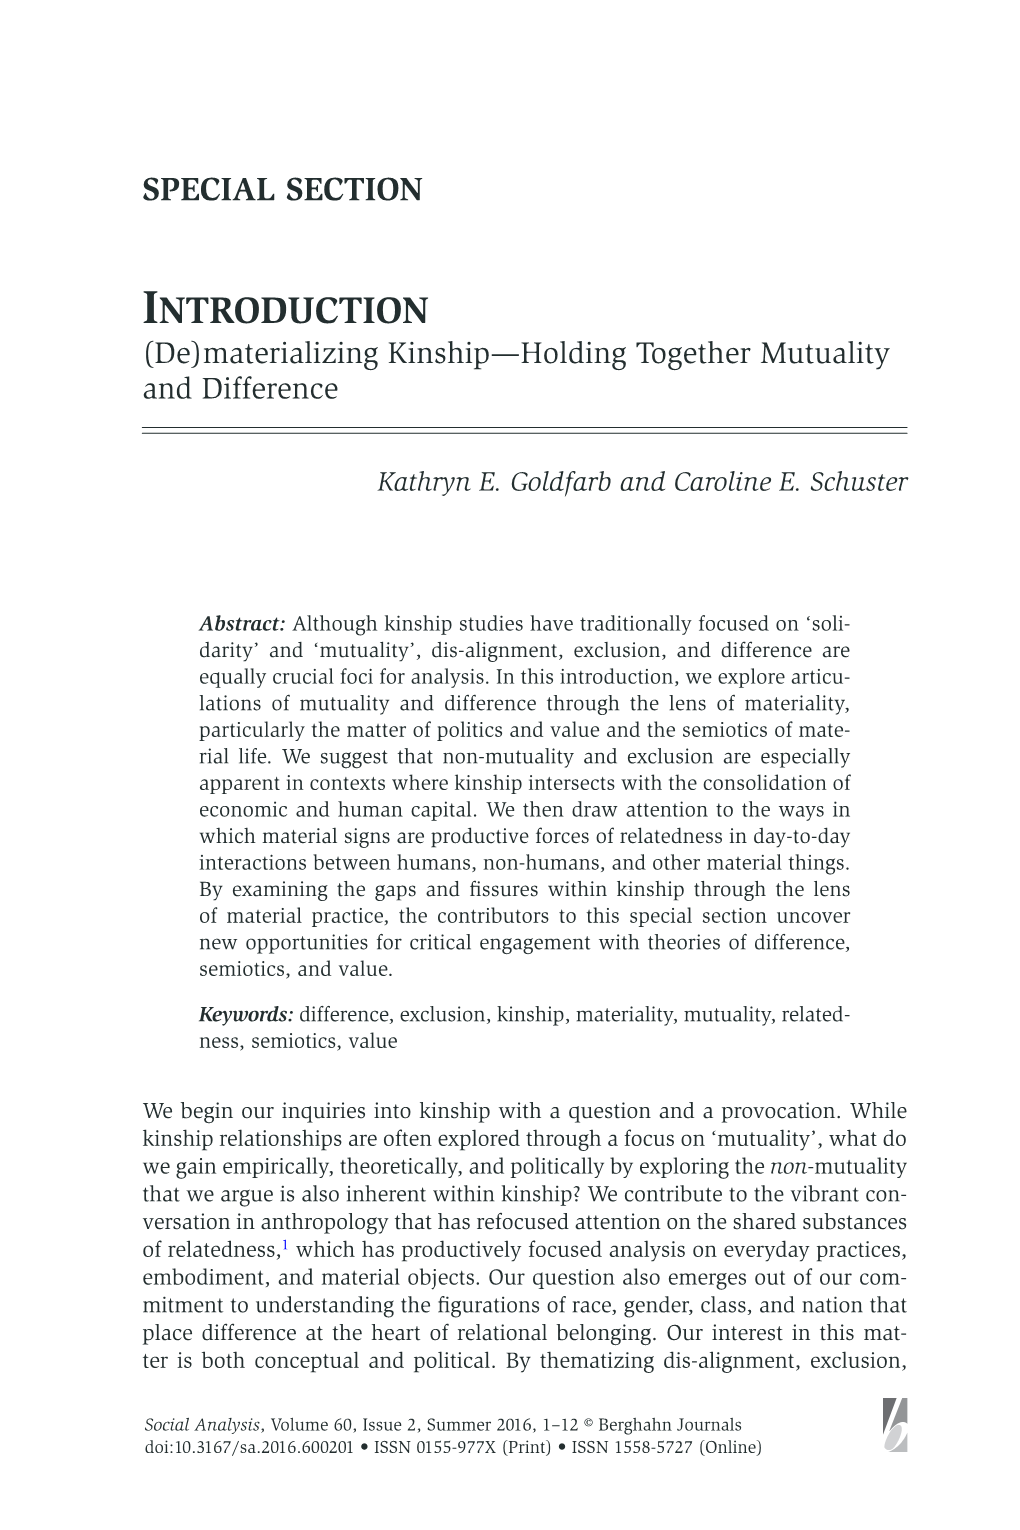 Introduction (De)Materializing Kinship—Holding Together Mutuality and Difference